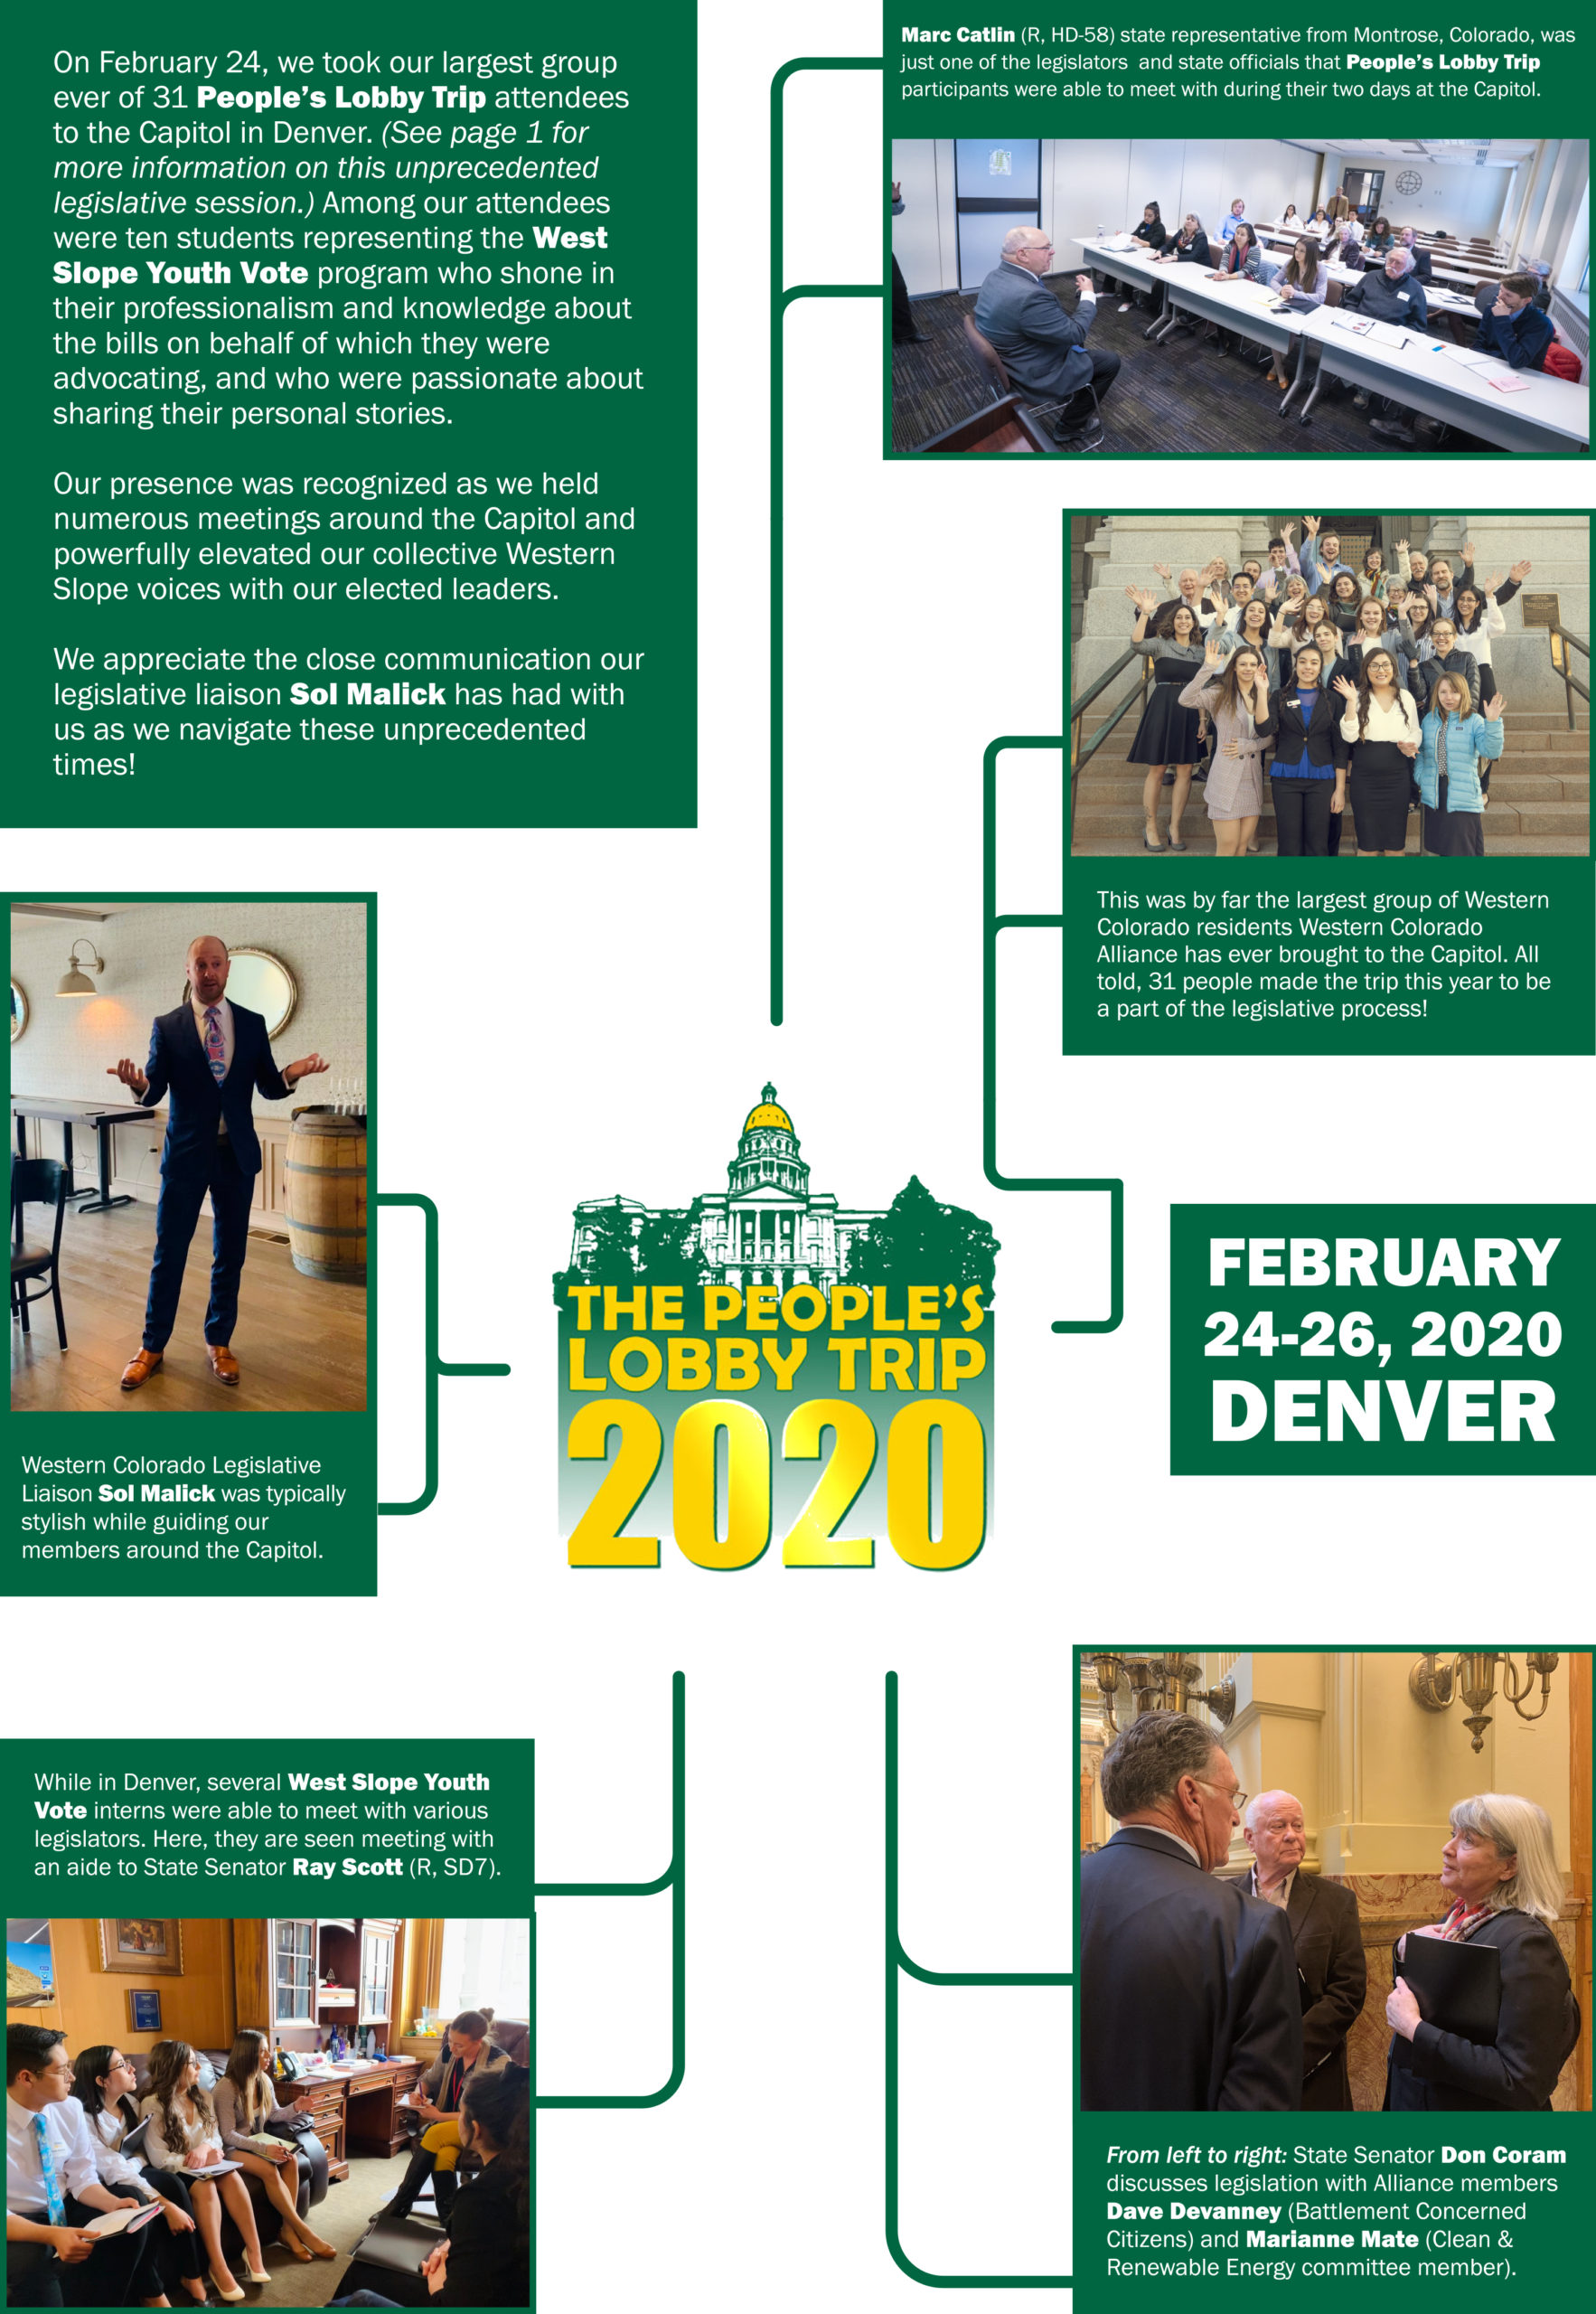 This image shows a collage of photographs from the recent 2020 People's Lobby Trip, demonstrating how Western Colorado residents were able to interact with political leaders and legislators.